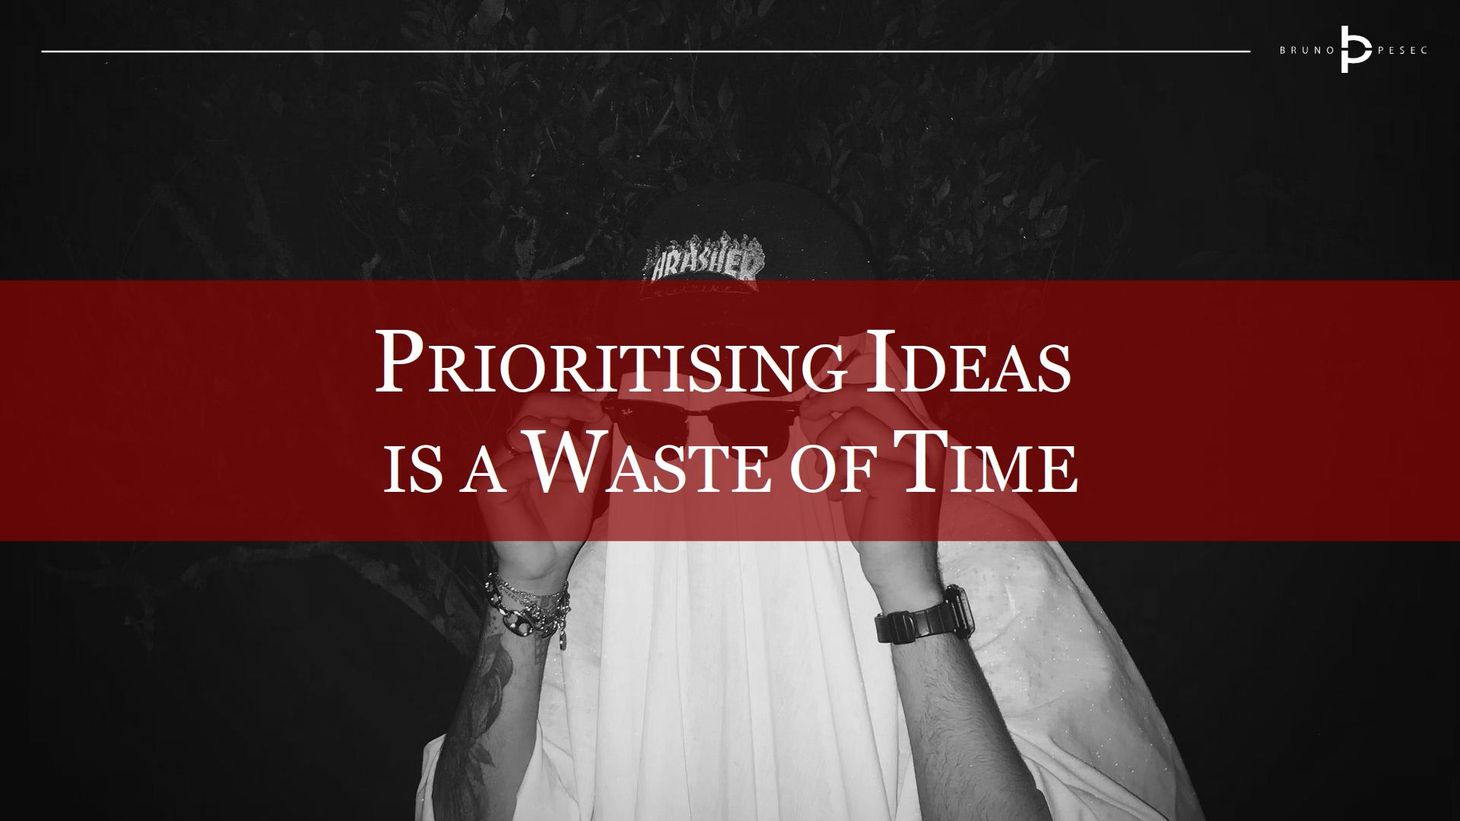 Prioritising ideas is a waste of time